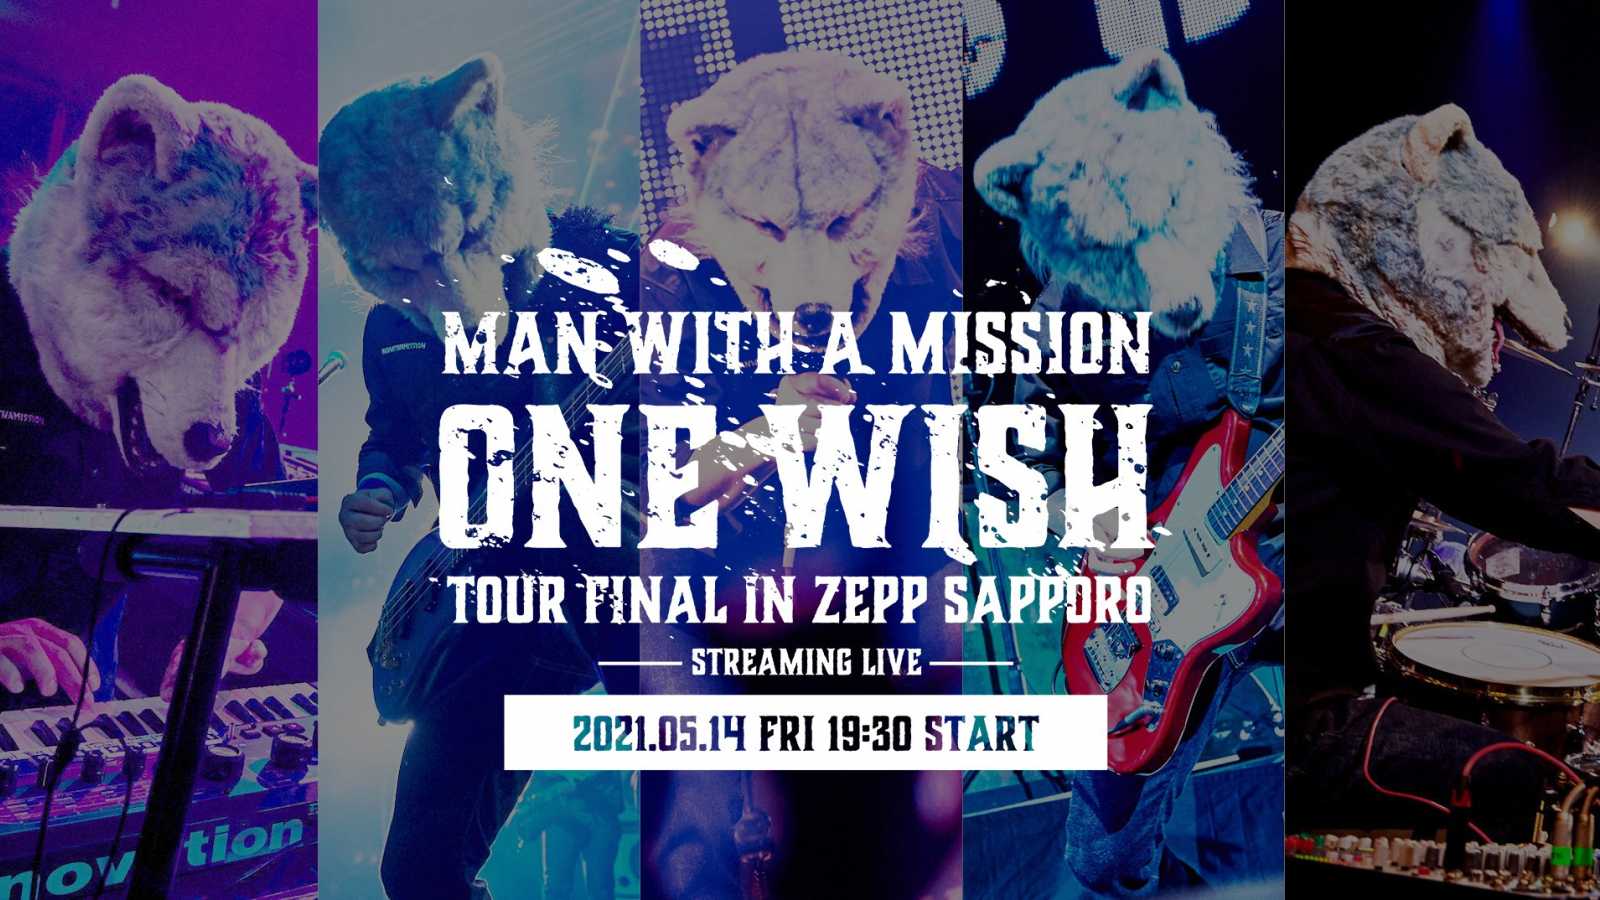 MAN WITH A MISSION to Stream "ONE WISH TOUR" Final Worldwide © MAN WITH A MISSION. All rights reserved.